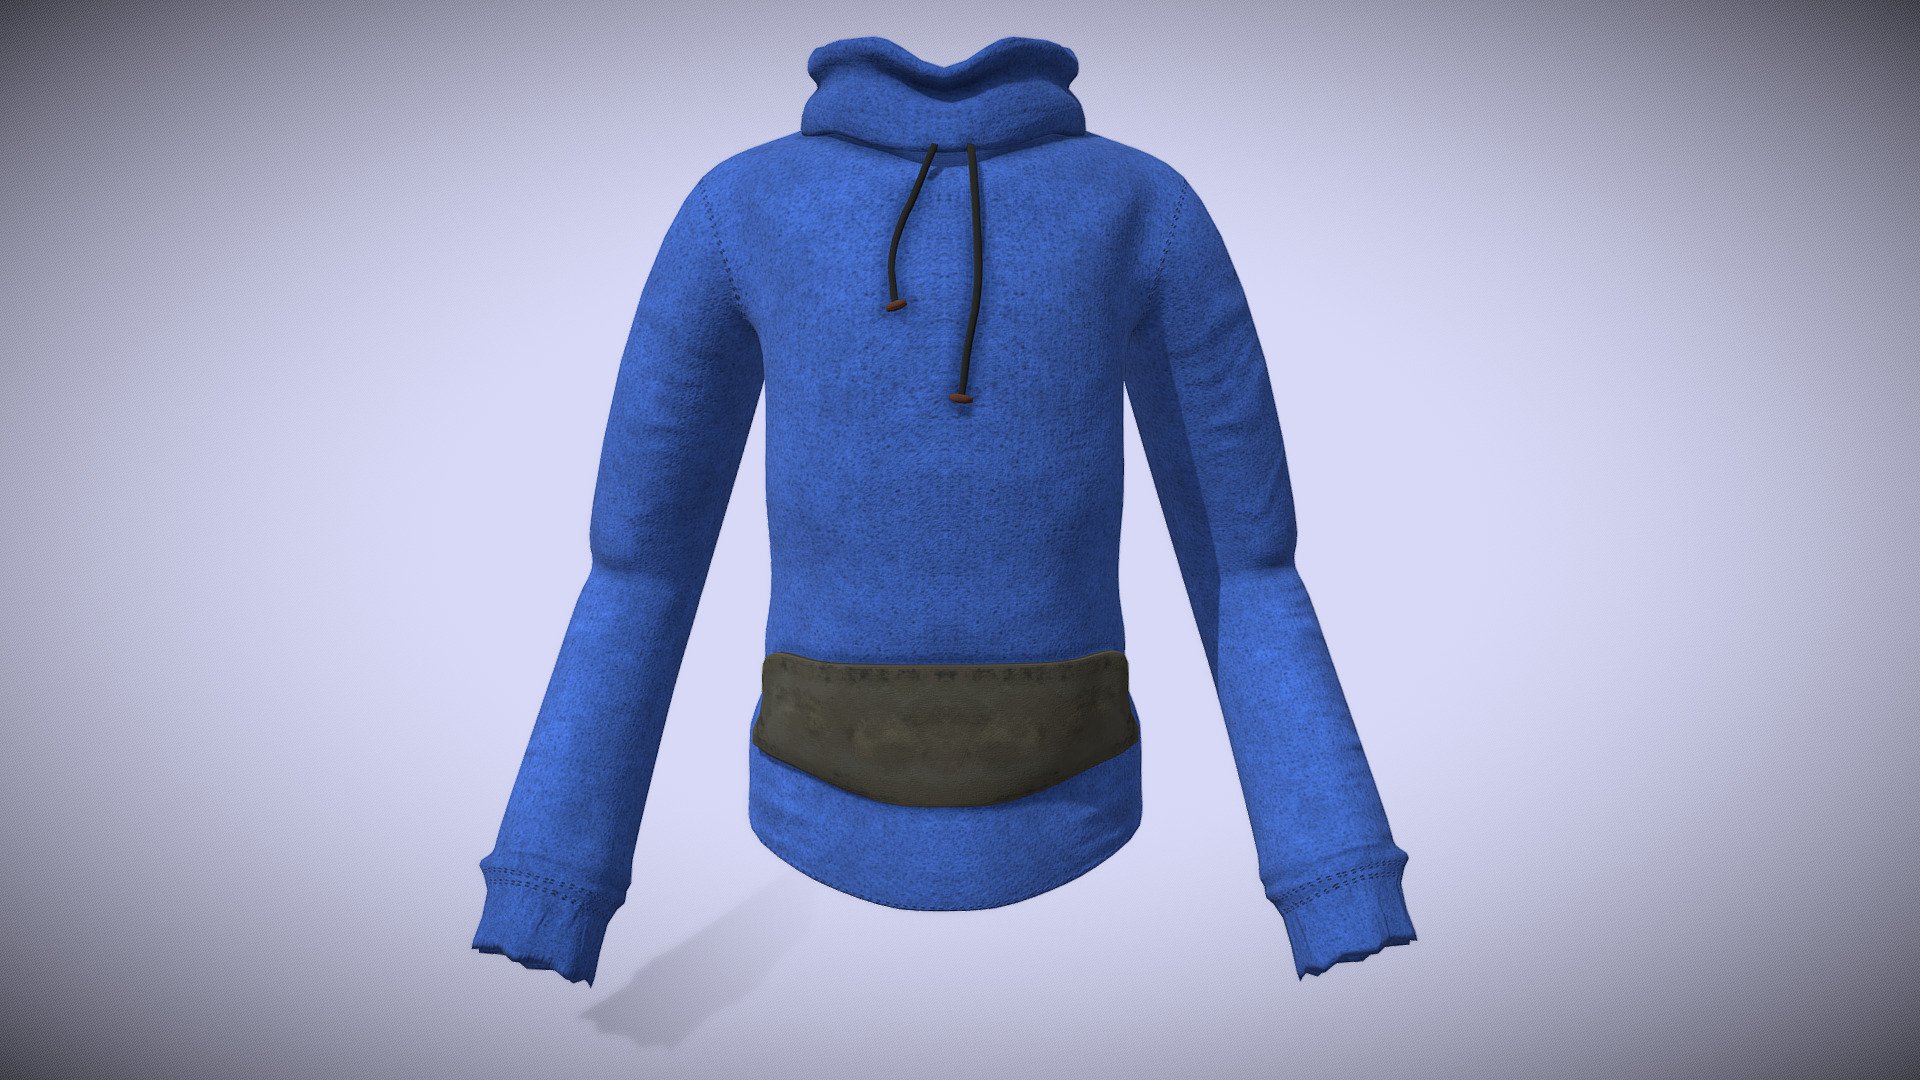 Jumper - Sweater
UV Unwrapped and textured. 
Comes with textures at 4096x4096 resolution. 

The model contains 3 objects, 1 set of materials, and 1 set of textures. 
Modeled in Blender, painted in Substance Painter. 

Blend file before modifiers has 883 Faces, and 958 Vertices.

Video Preview: https://youtu.be/EtQE5fYfPQY - Jumper - Sweater - Buy Royalty Free 3D model by Ed.Jan 3d model